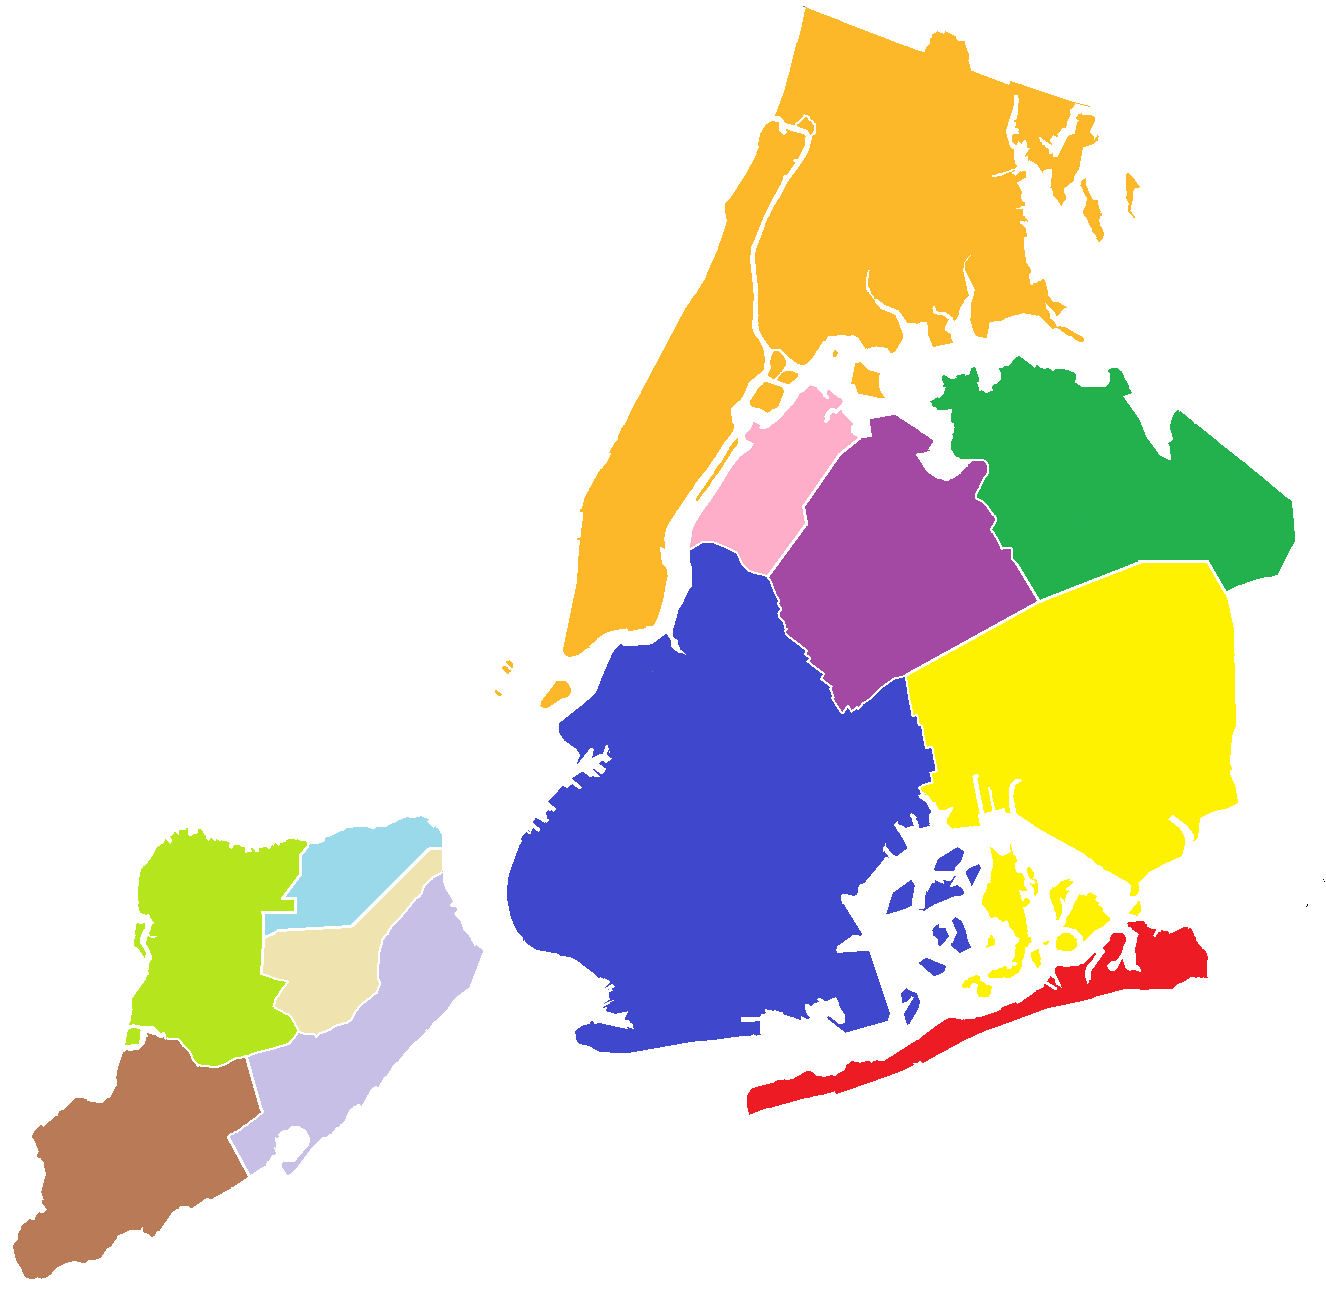 What Is The Greater New York City Area?